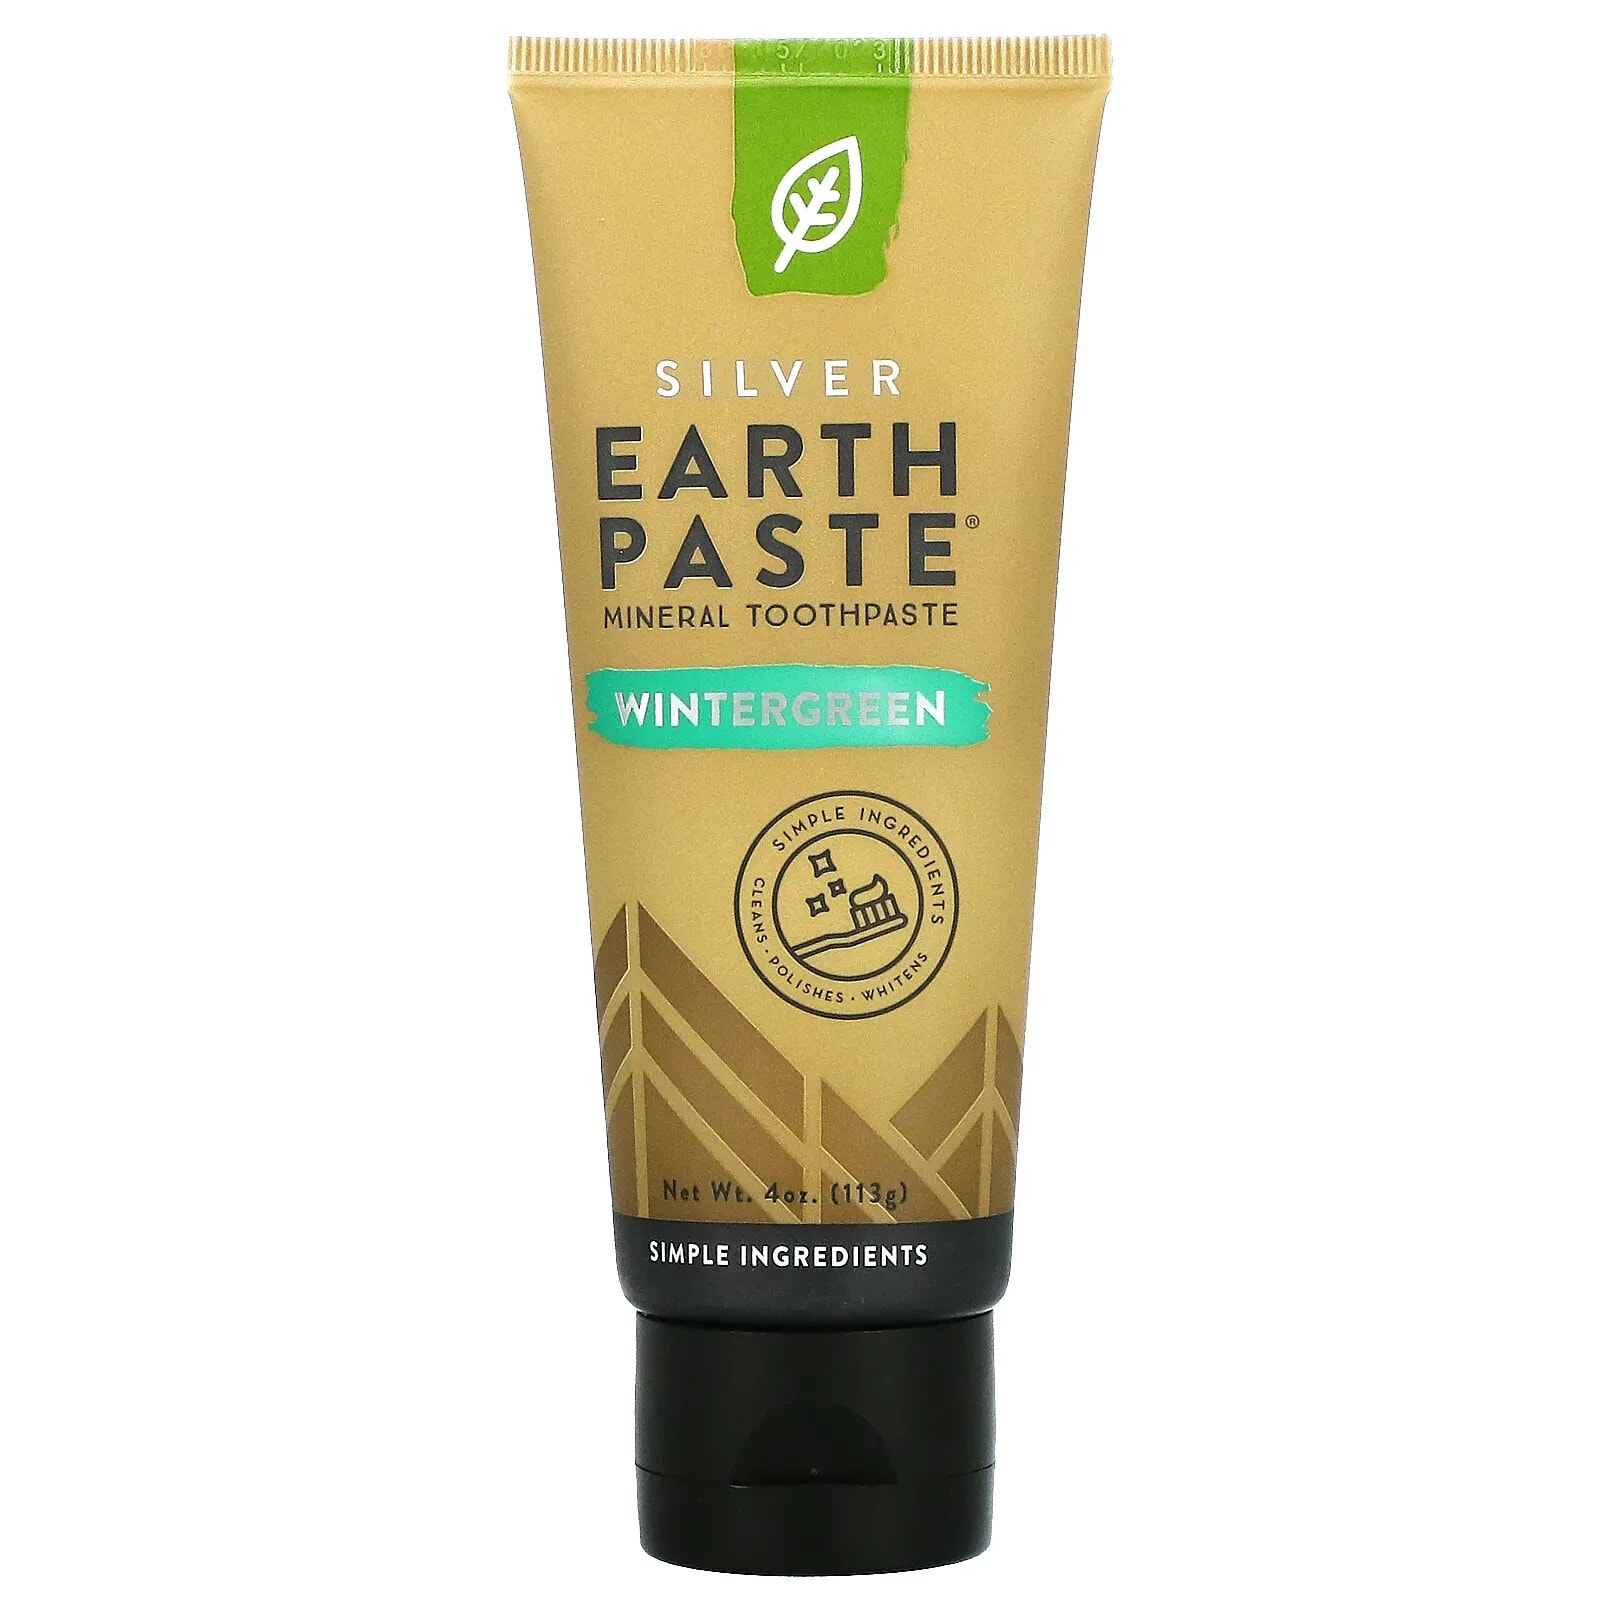 Silver Earthpaste, Mineral Toothpaste, Peppermint, 4 oz (113 g)